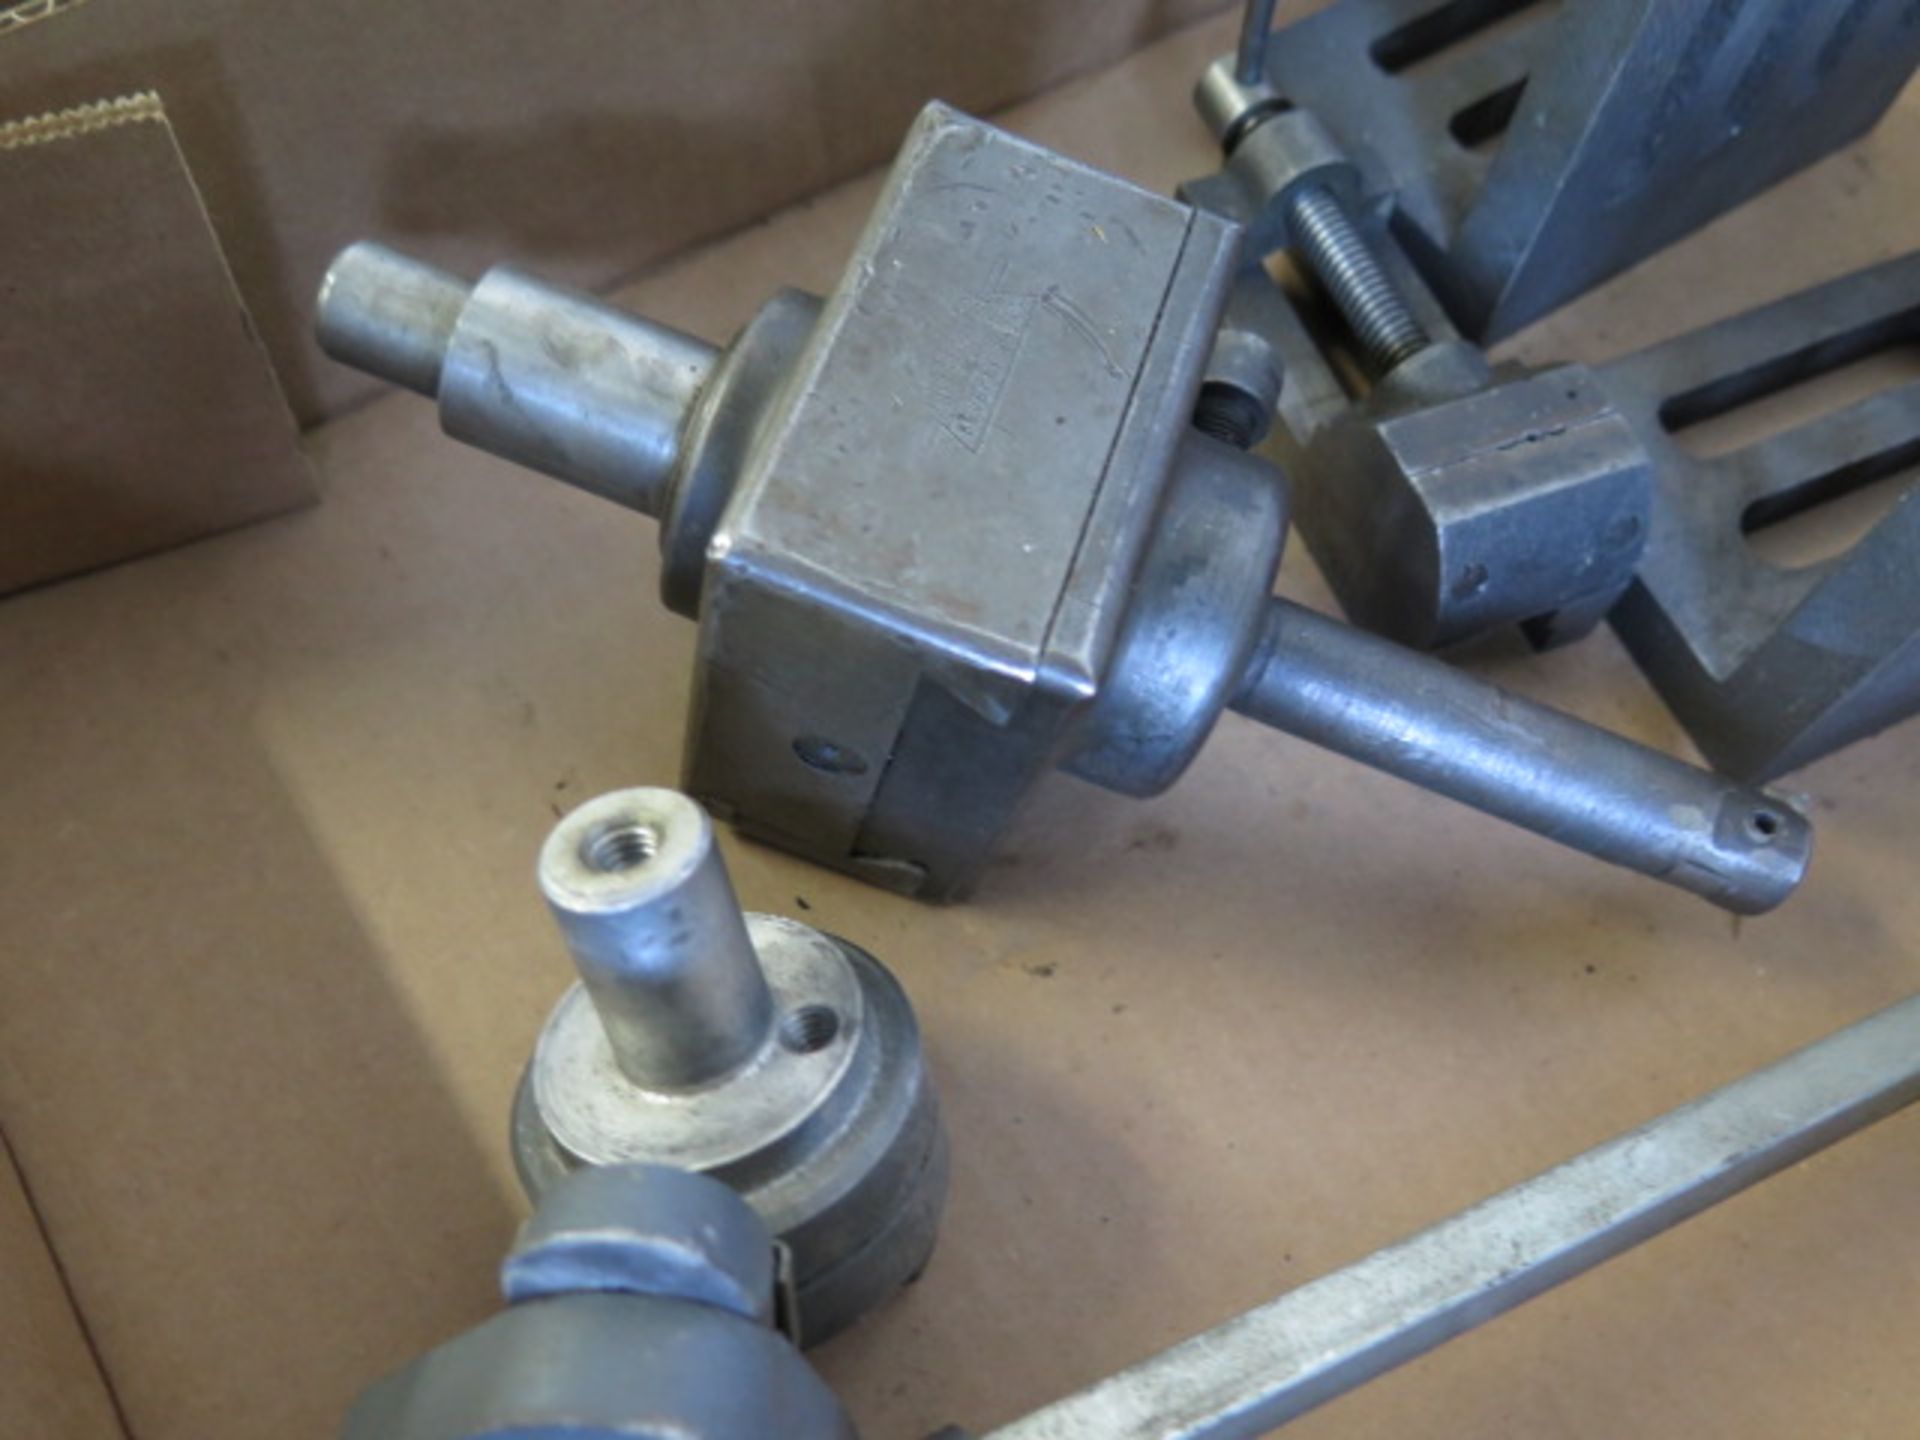 Criterion Boring Head, Angle Plates, 1 1/2" Machine Vise and Drill Sharpening Attachment (SOLD AS-IS - Image 3 of 5